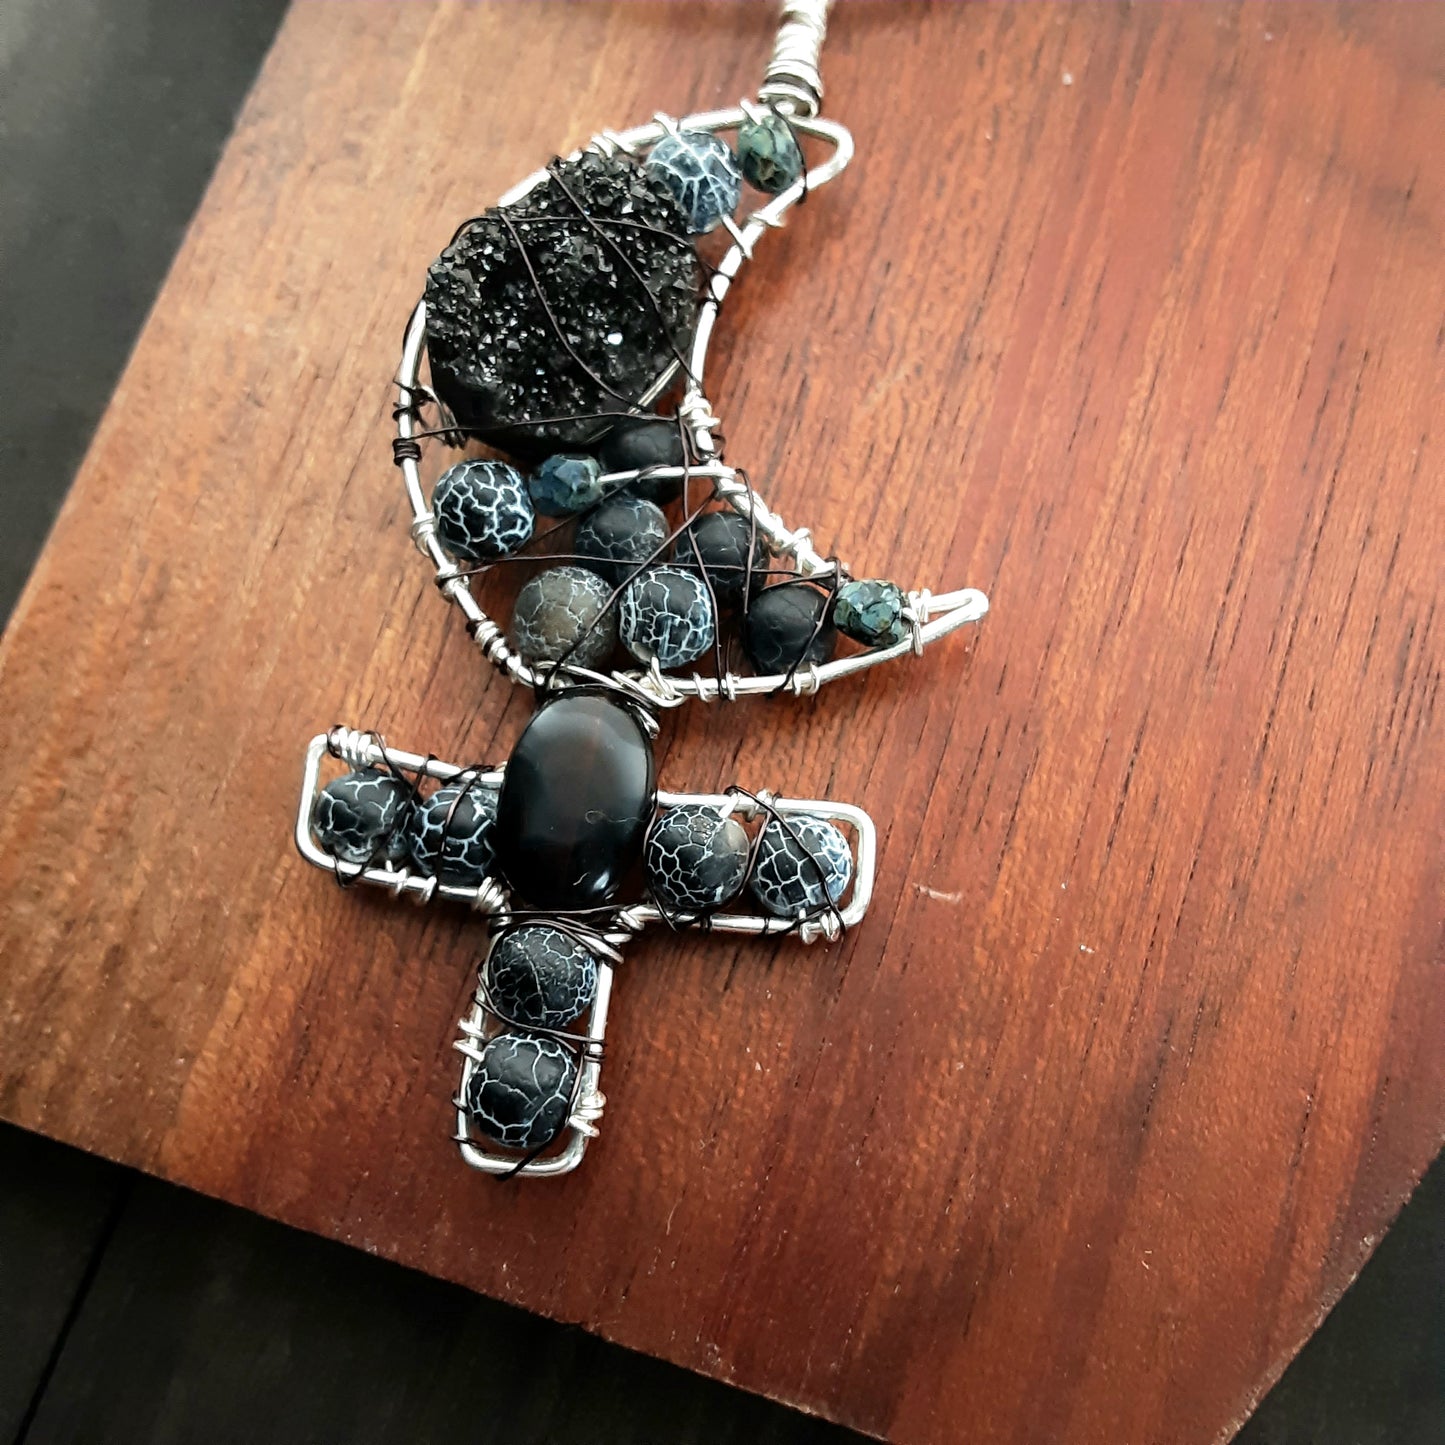 Lilith necklace Black Moon Astrology symbol Pagan necklace Obsidian and Agate handmade pendant with druzy focal